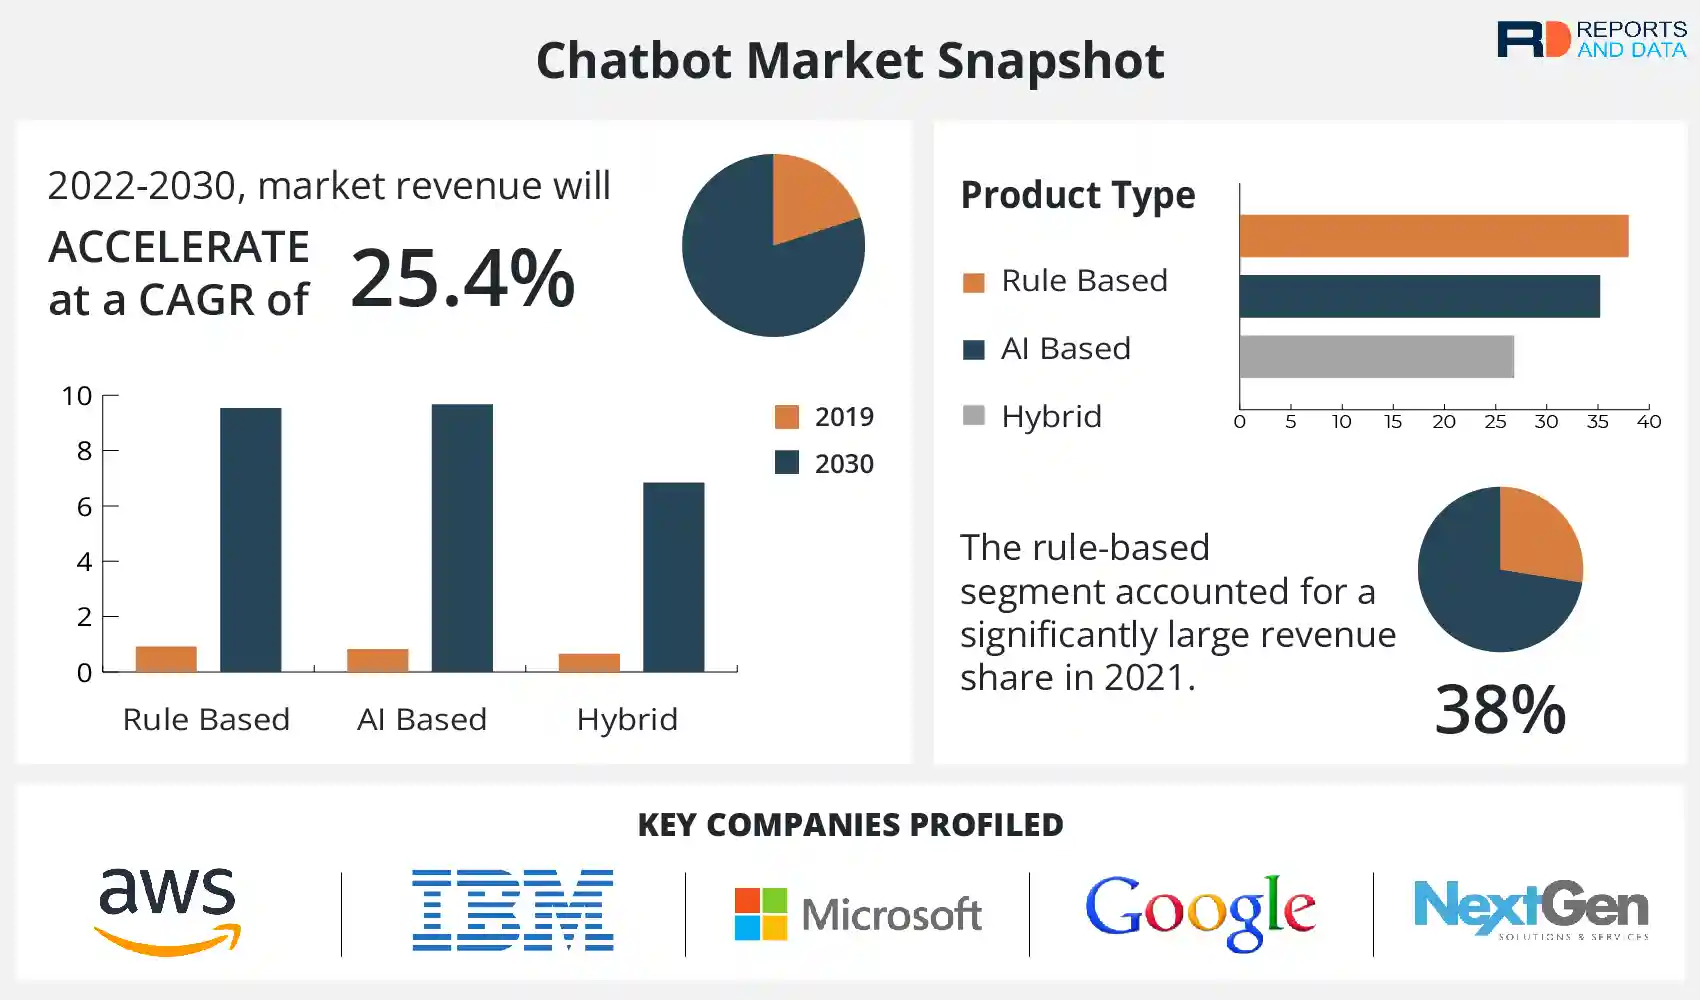 Overview of the Current Chatbot Market